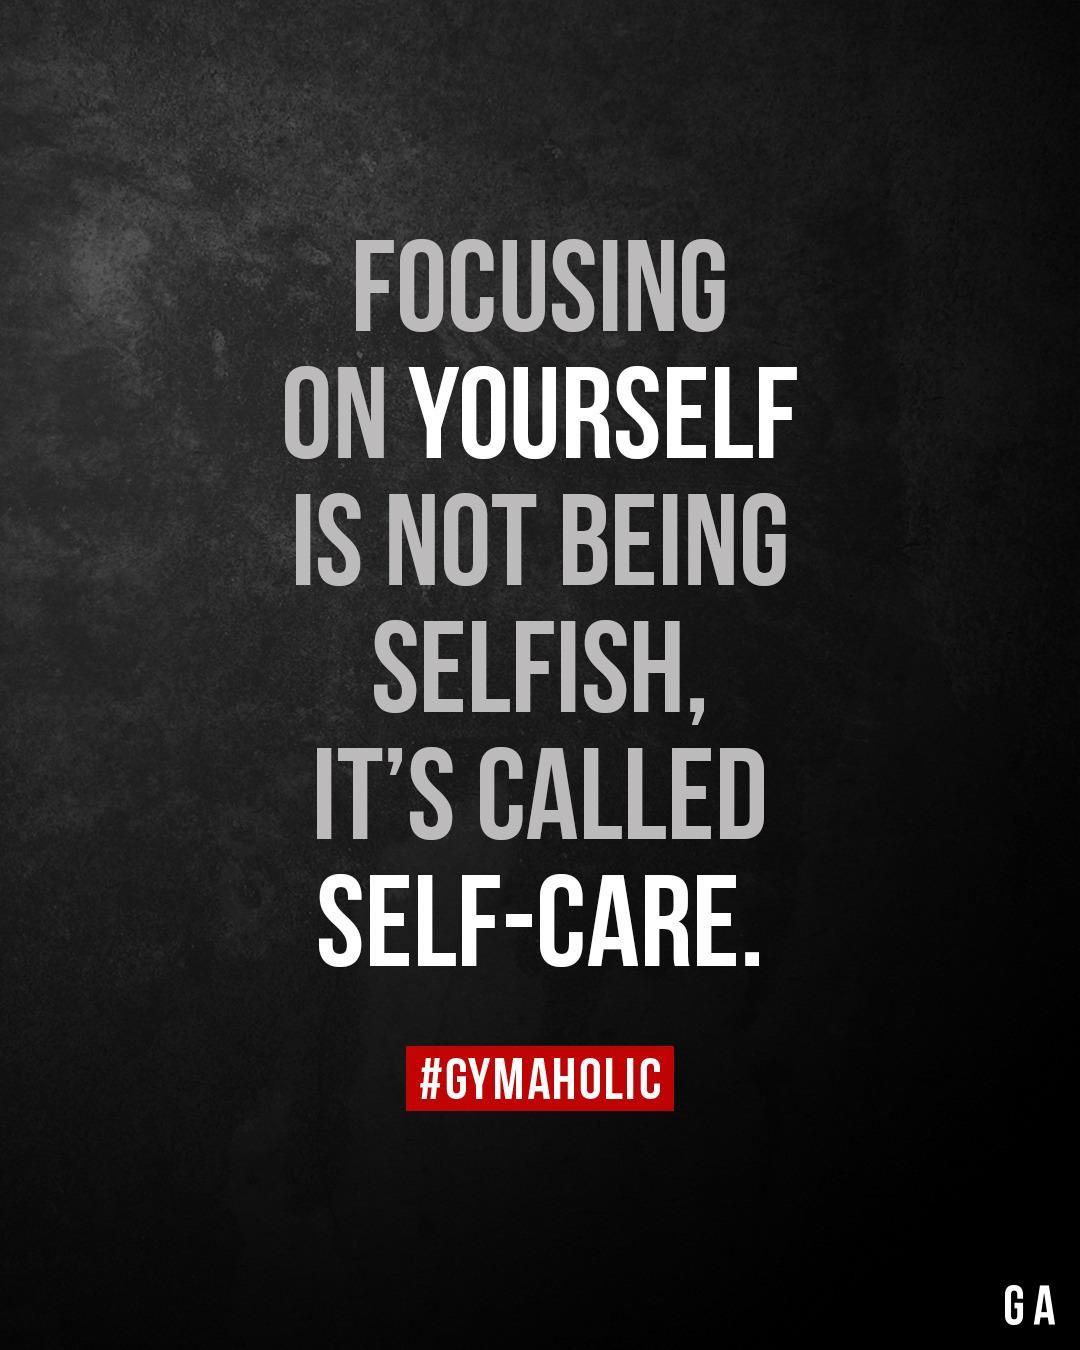 Focusing on yourself is not being selfish - Gymaholic